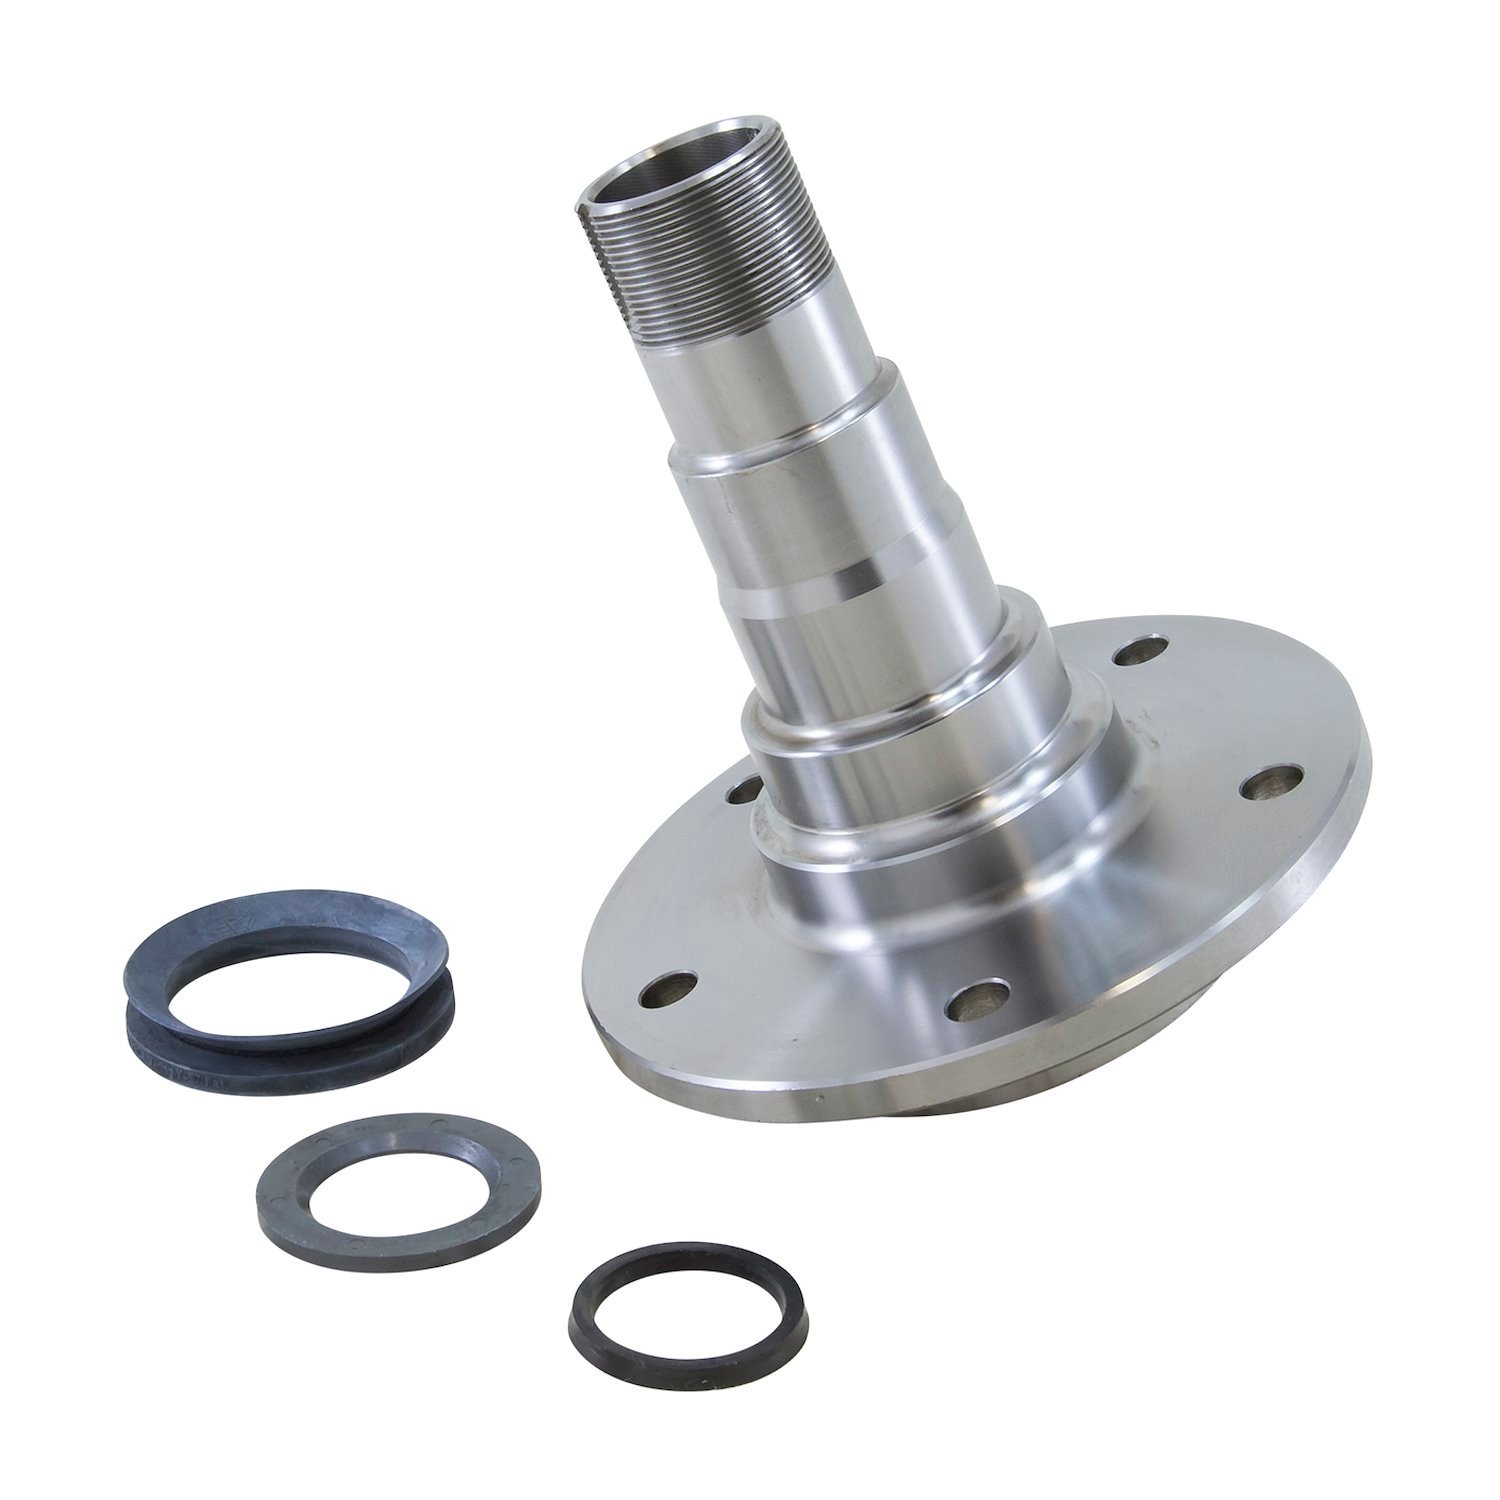 Front Spindle For Heavy Duty Axles On '74-'82 Scout With Disc Brakes